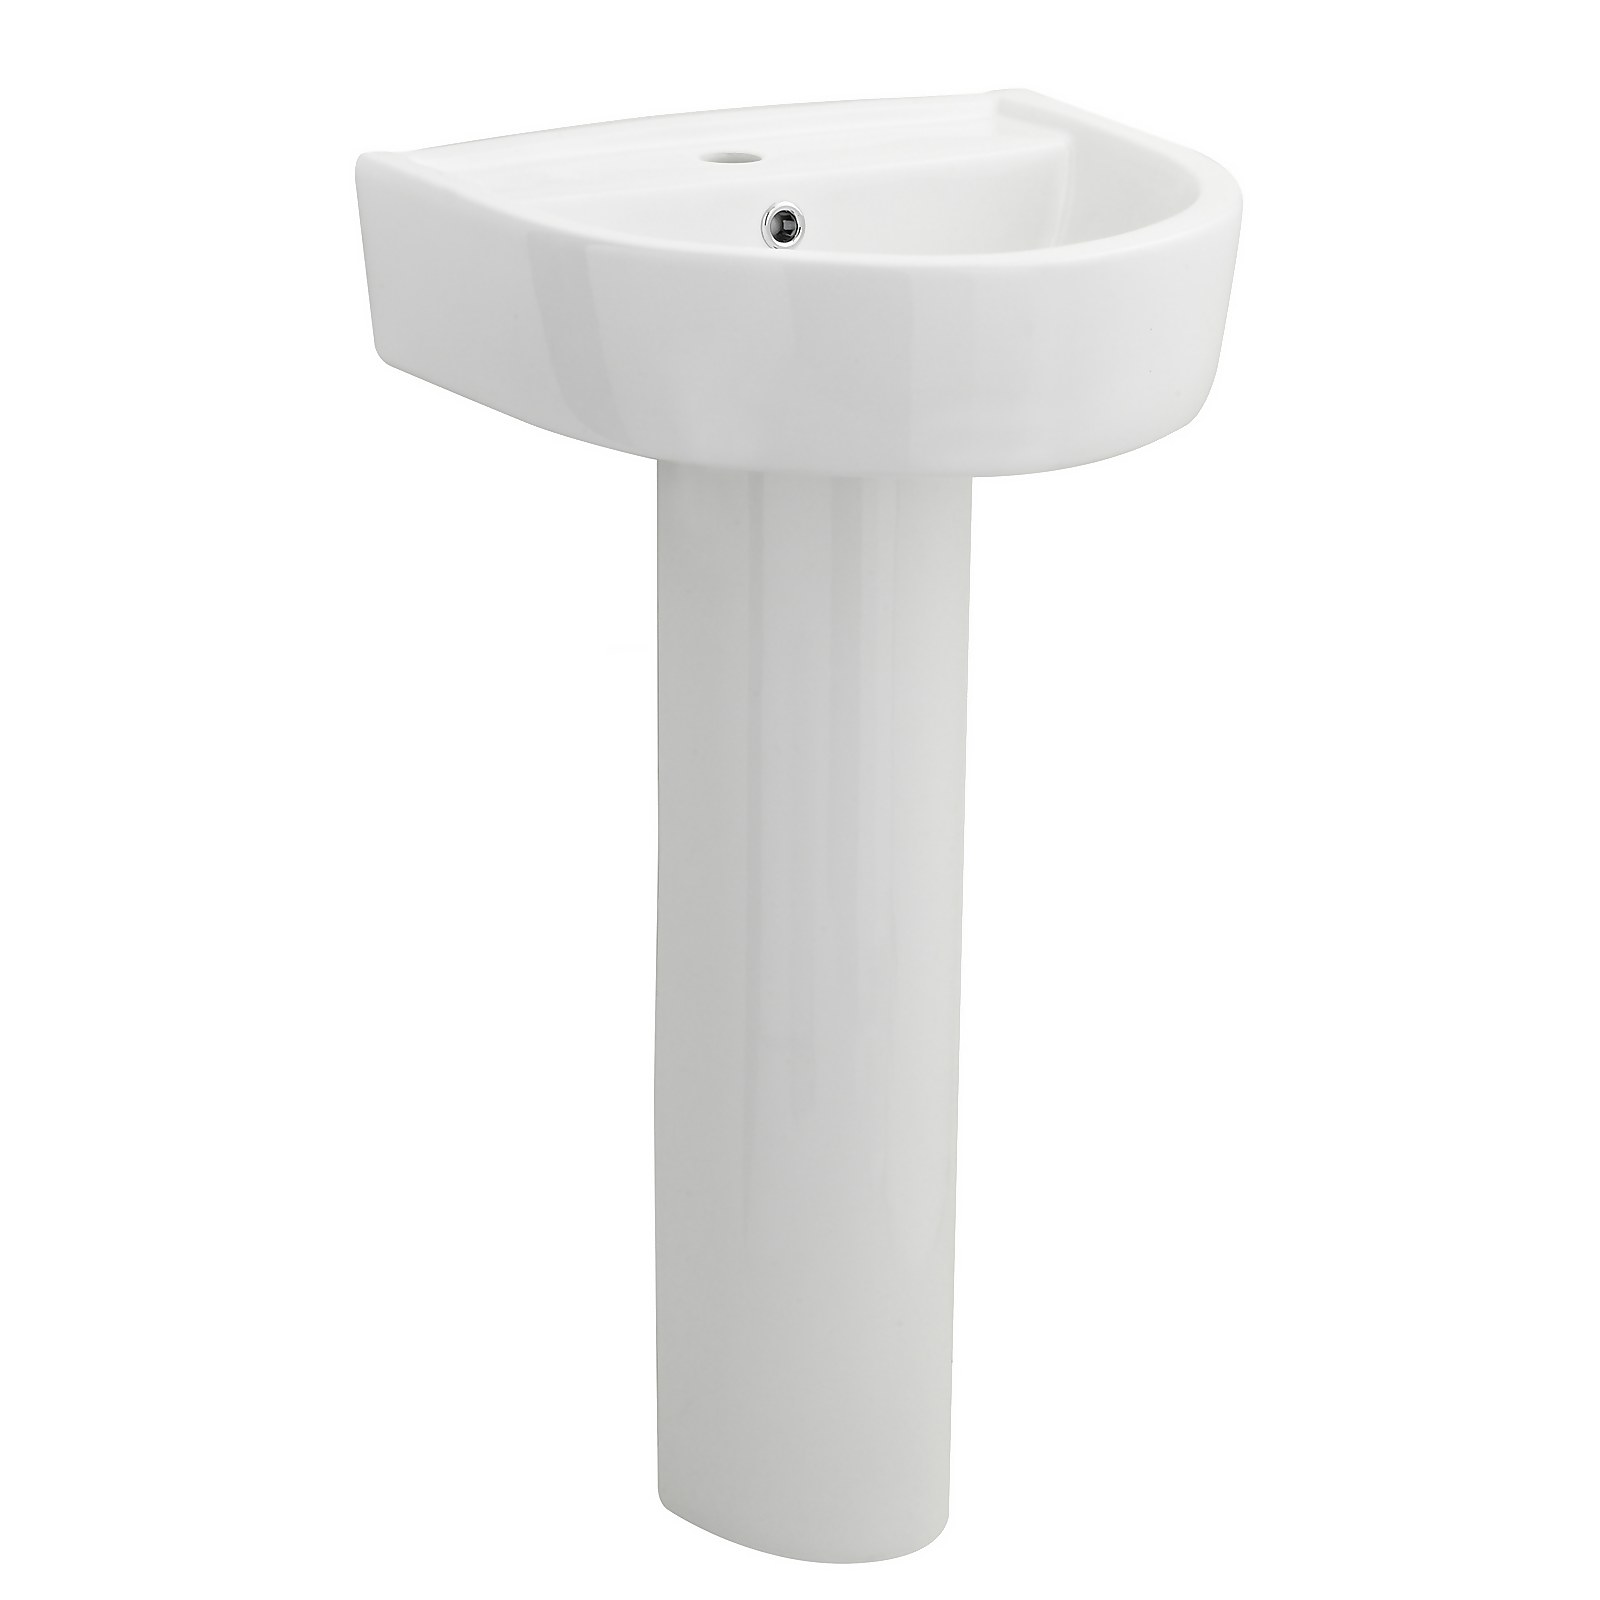 Photo of Balterley D-shape 1 Tap Hole Basin And Full Pedestal - 425mm